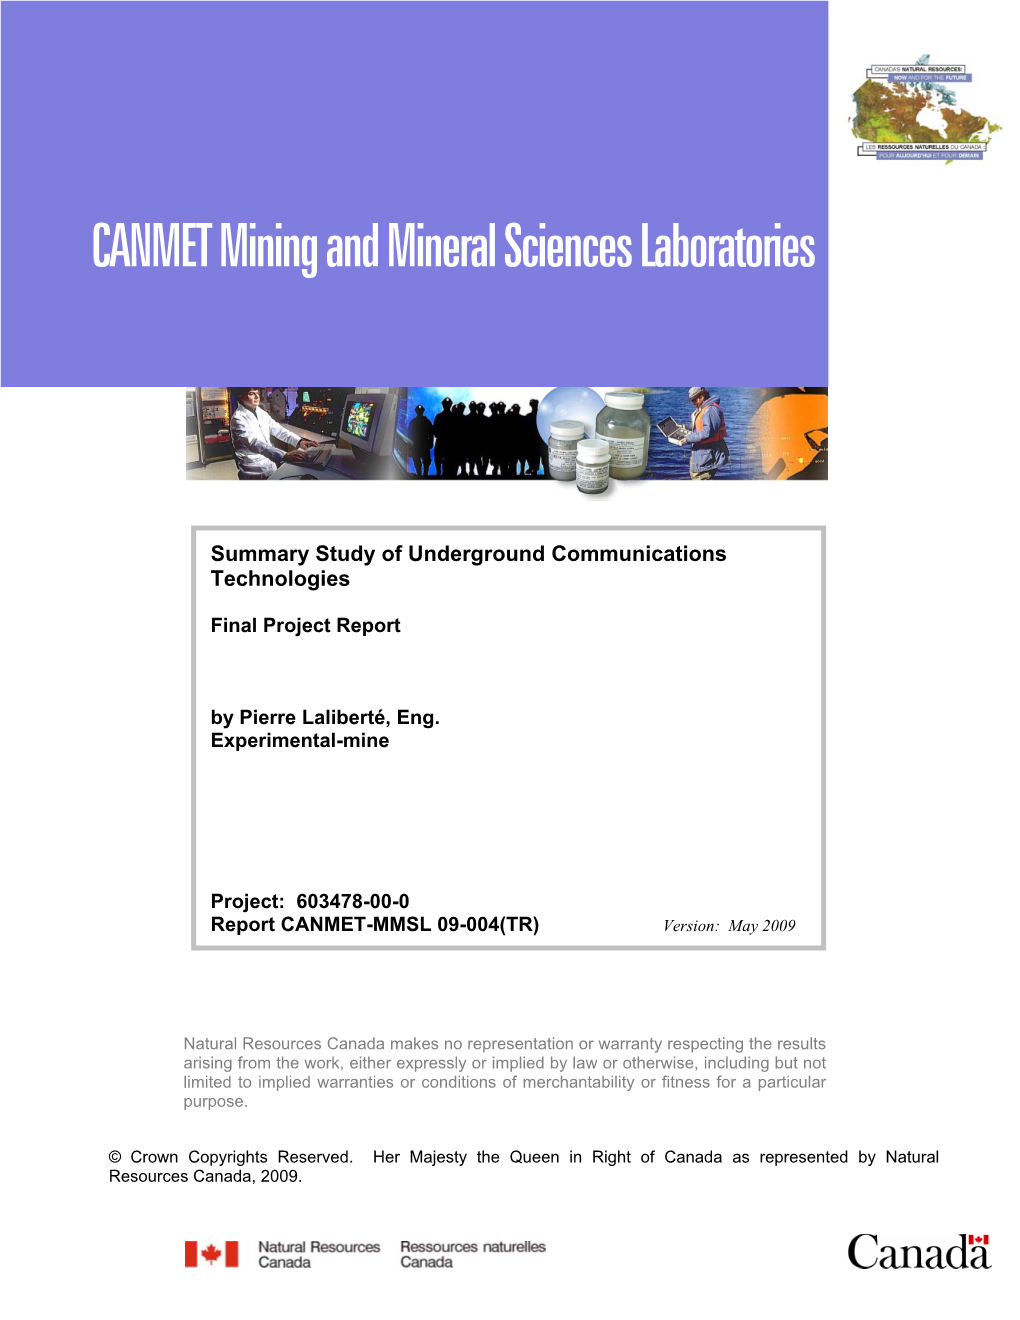 CANMET Mining and Mineral Sciences Laboratories